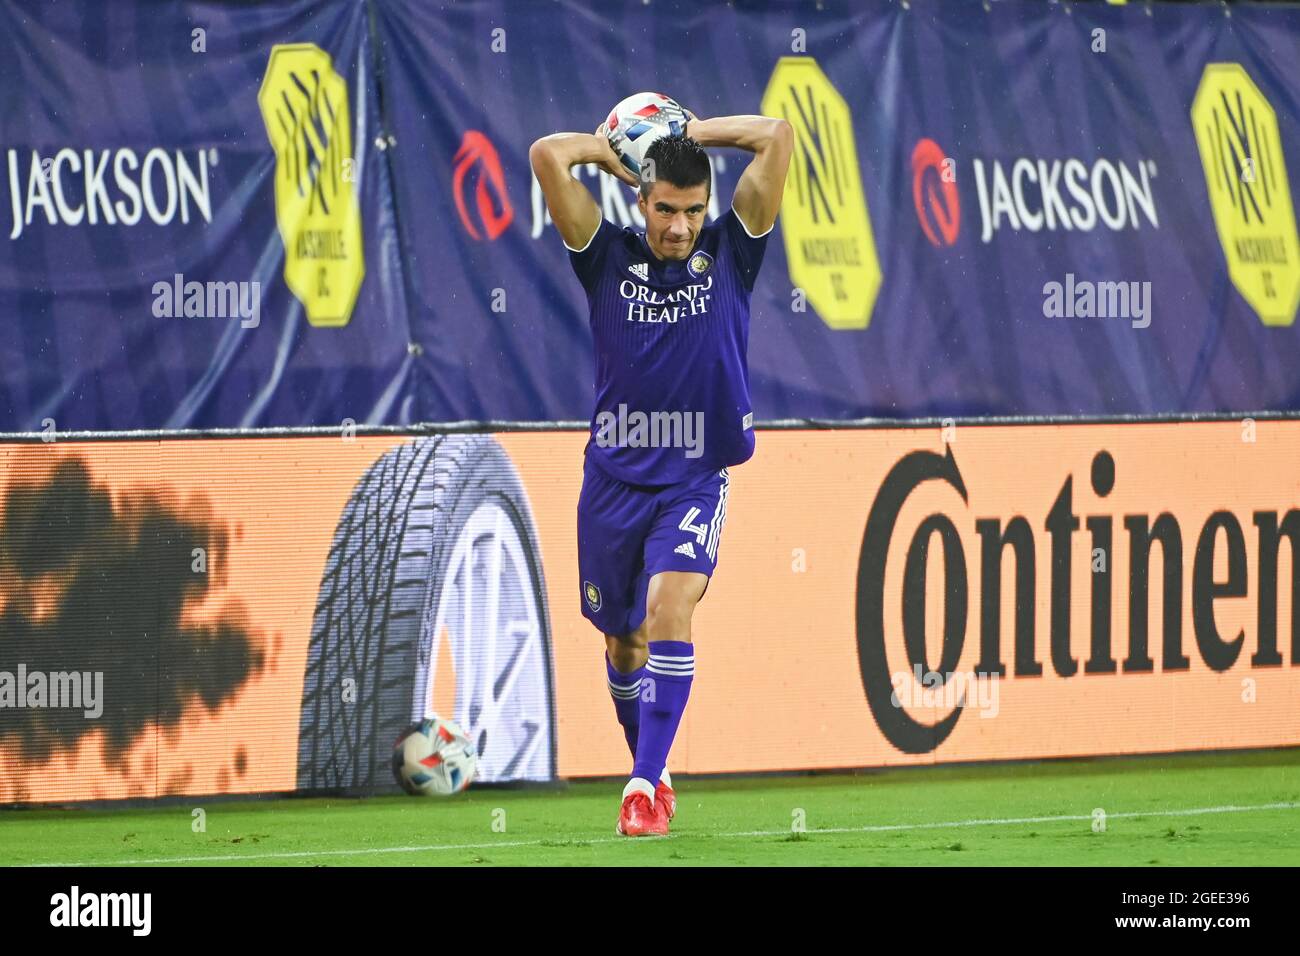 August 18, 2021: Orlando defender, Joao Moutinho (4), in action during the MLS match between Orlando City SC and Nashville SC at Nissan Stadium in Nashville, TN. Kevin Langley/CSM Stock Photo